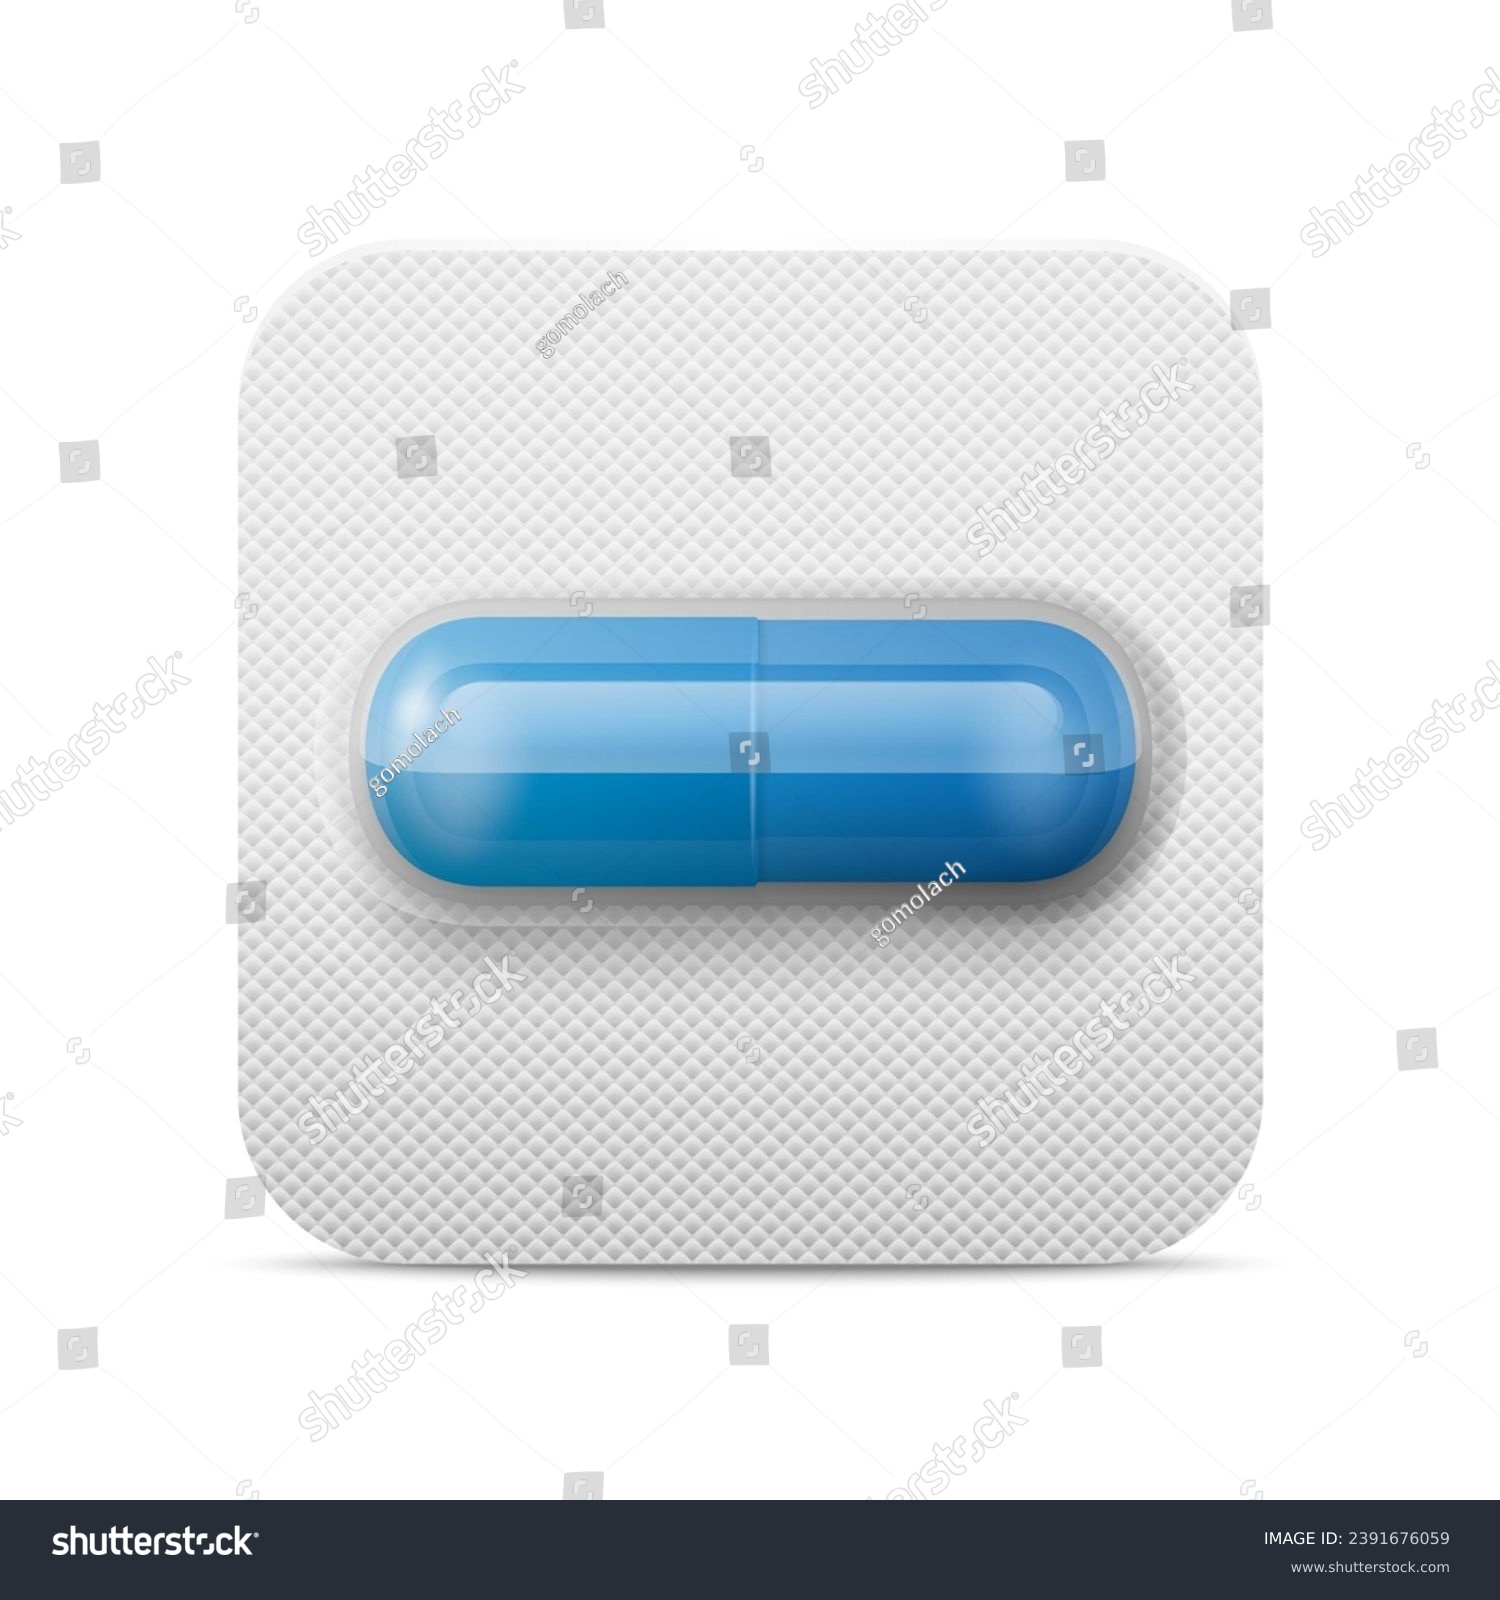 Vector Realistic Pharmaceutical Medical Blue Pill, Vitamins, Capsule in Blister Closeup Isolated. Pill in Blister Packaging Design Template. Front View. Medicine, Health Concept #2391676059